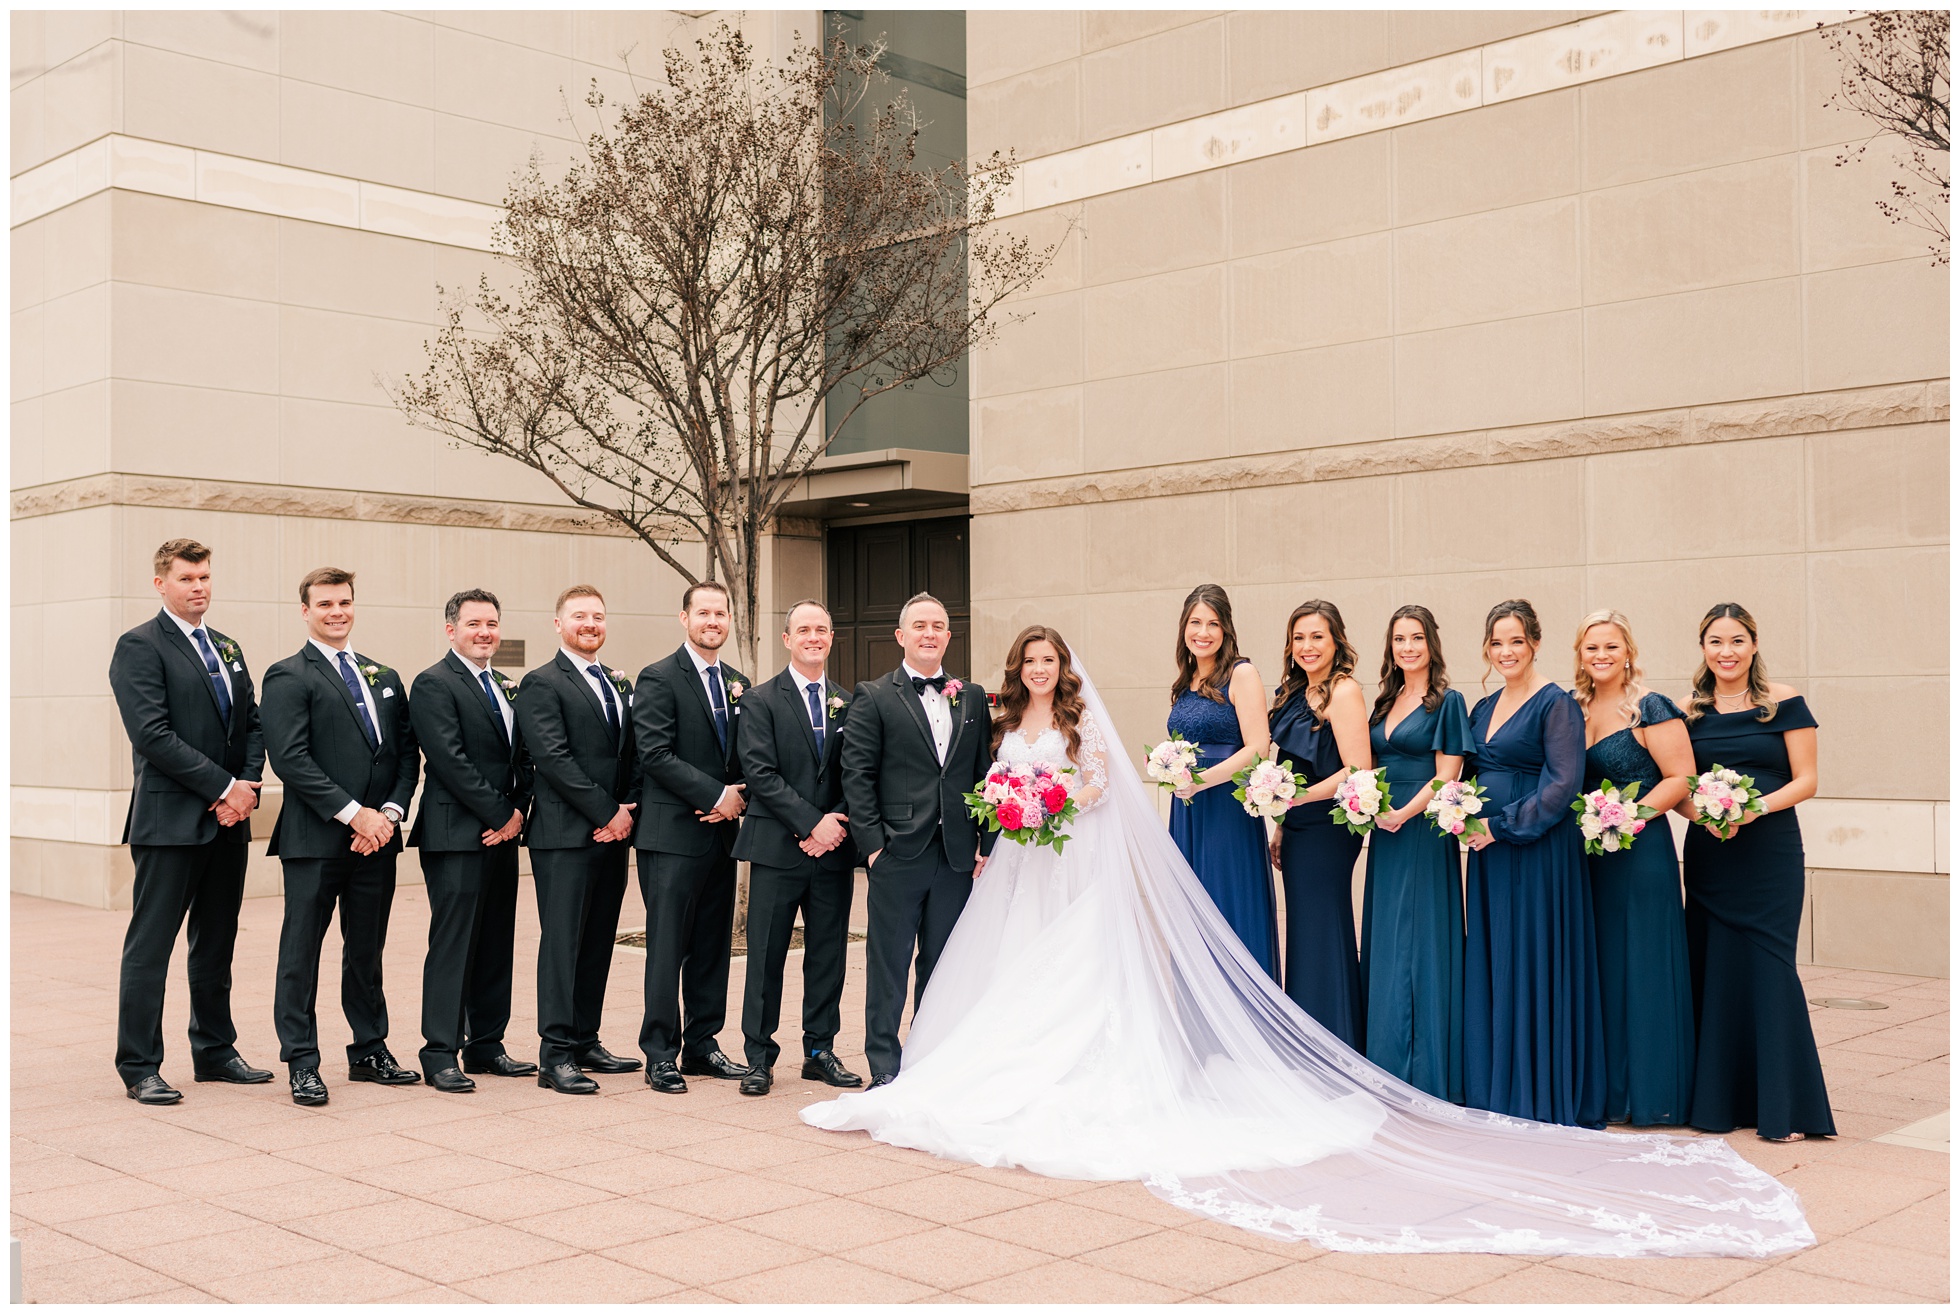 traditional wedding party photo outside the Co Cathedral of the Sacred Heart Houston.